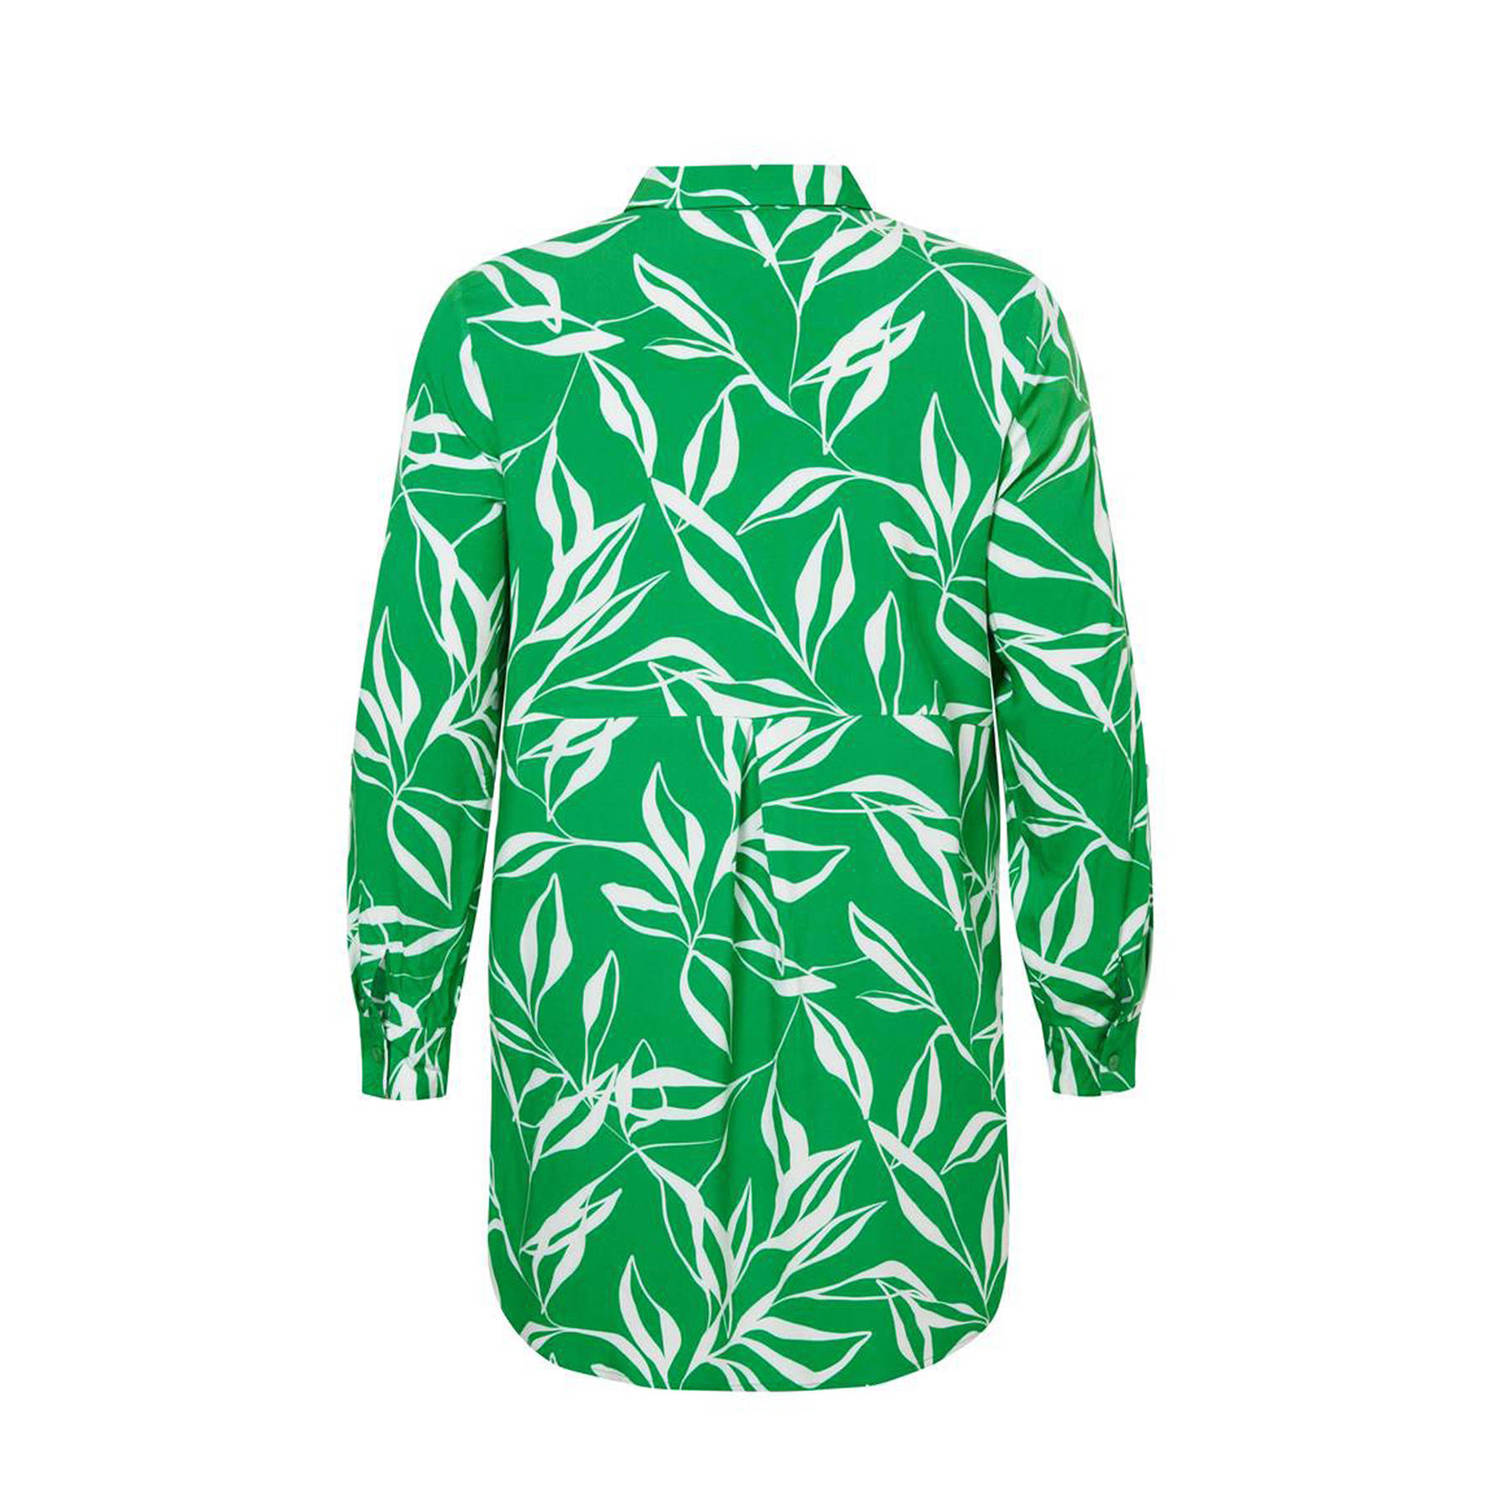 Miss Etam Plus blouse Lilly blouse long chally Pl met all over print groen wit